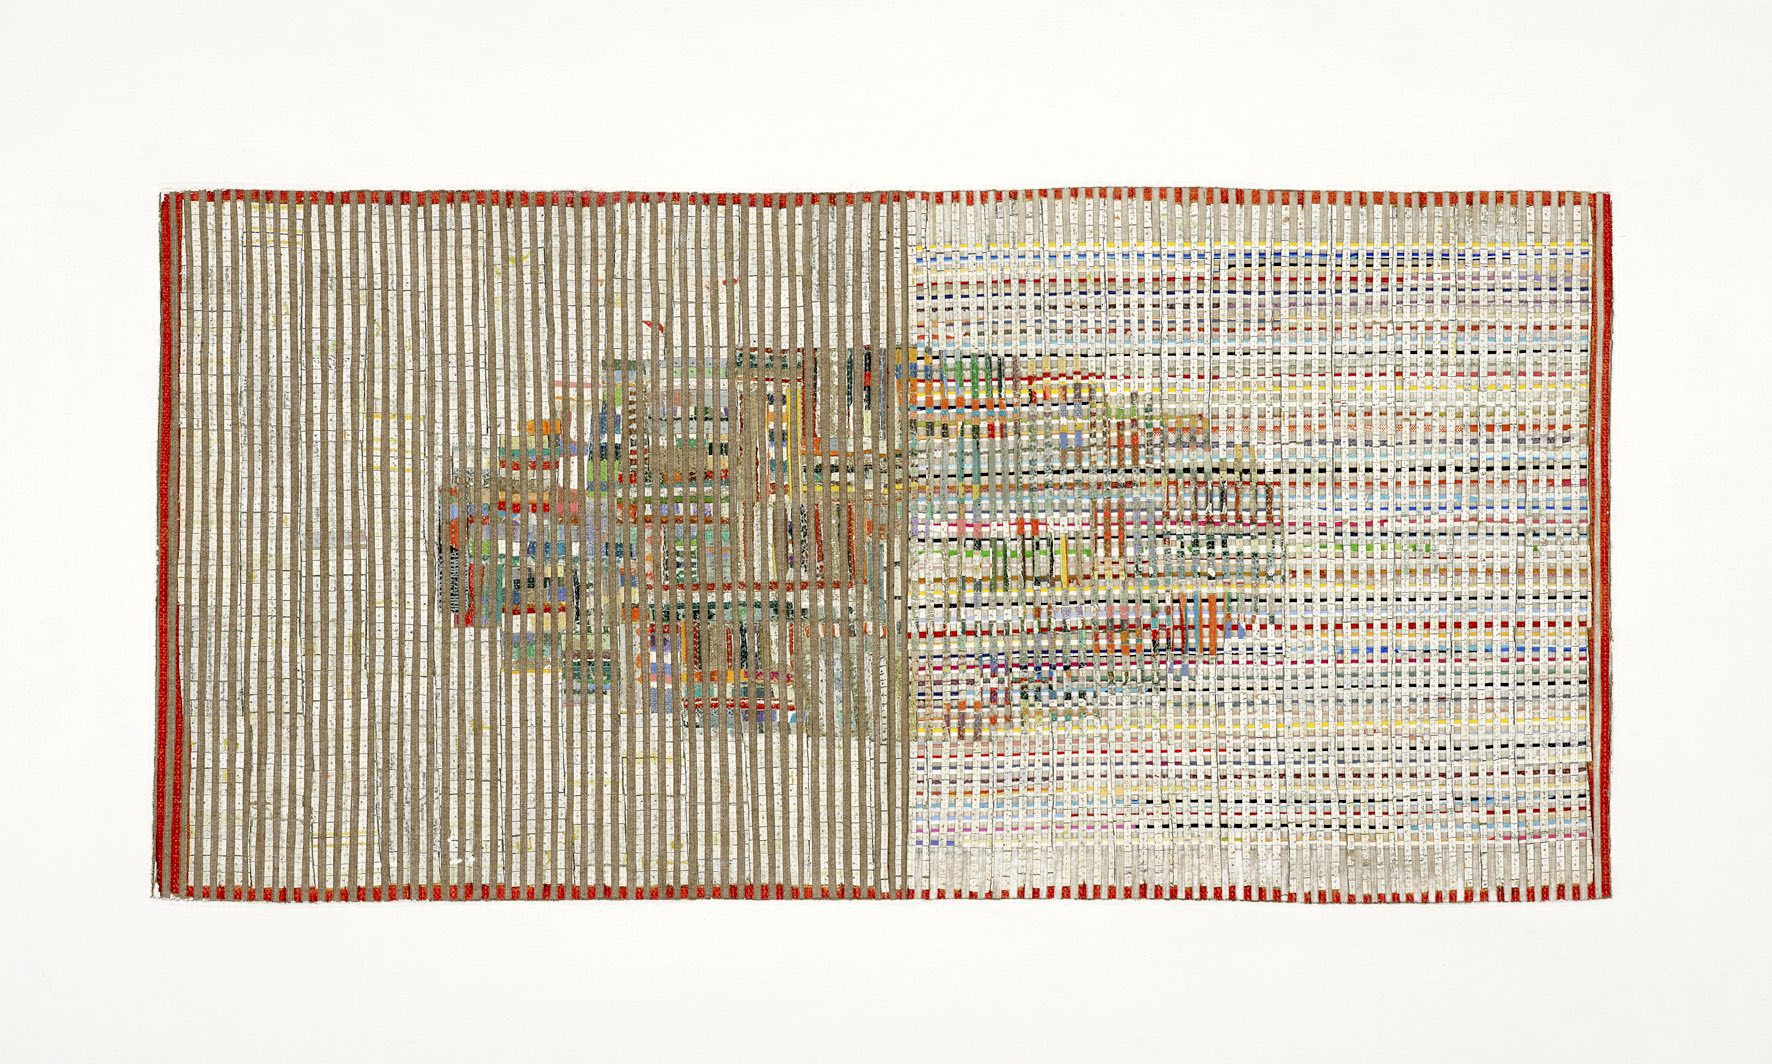 Eveline Kotai - Field for a New Ball 1, 2012, mixed media stitched collage, 60x90cm